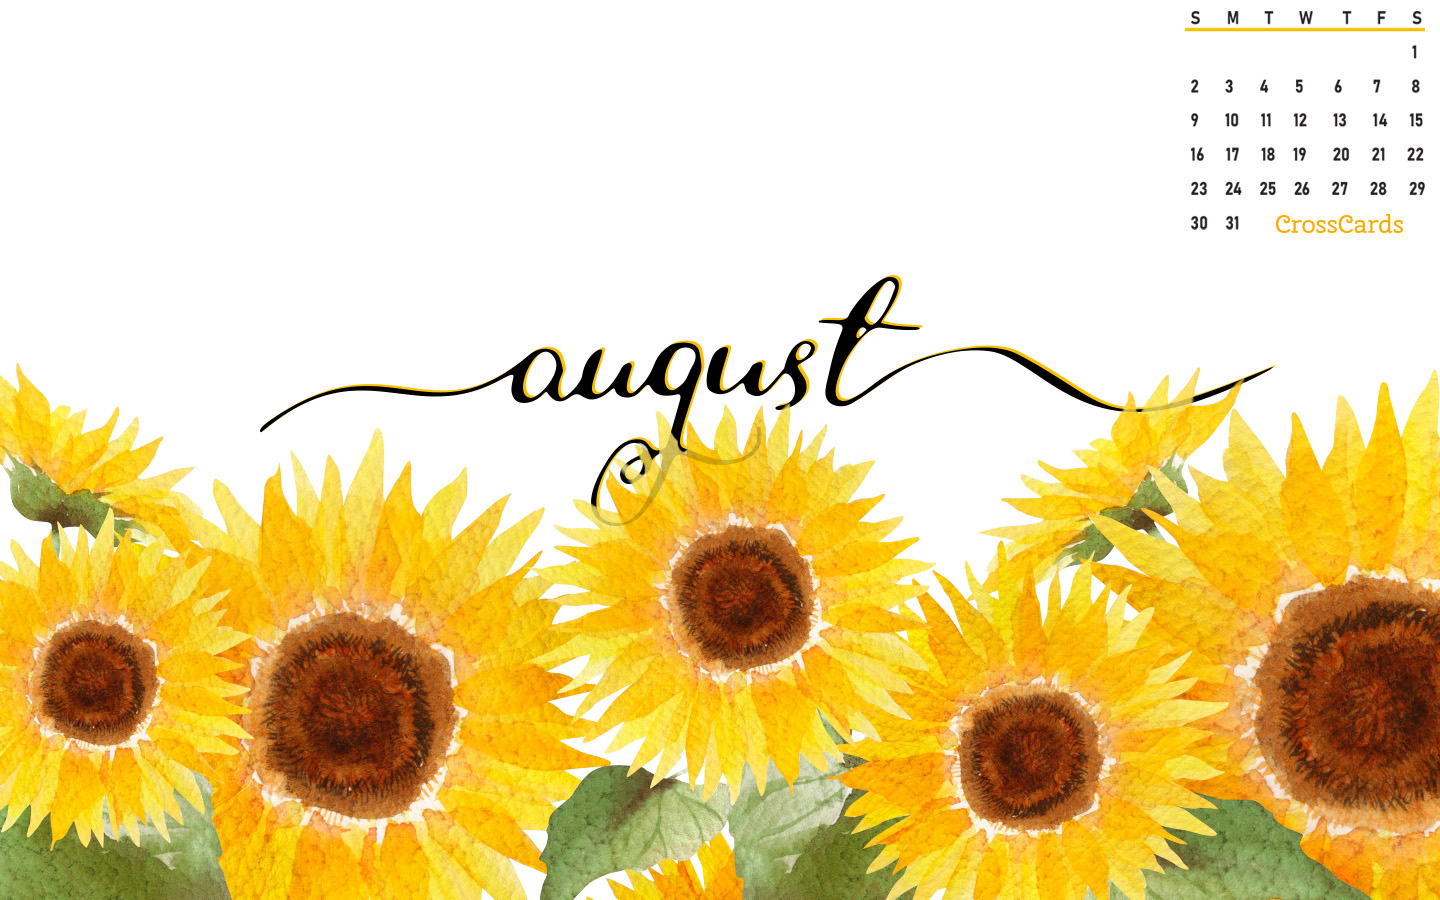 FREE August wallpapers  14 to choose from for desktop and phone